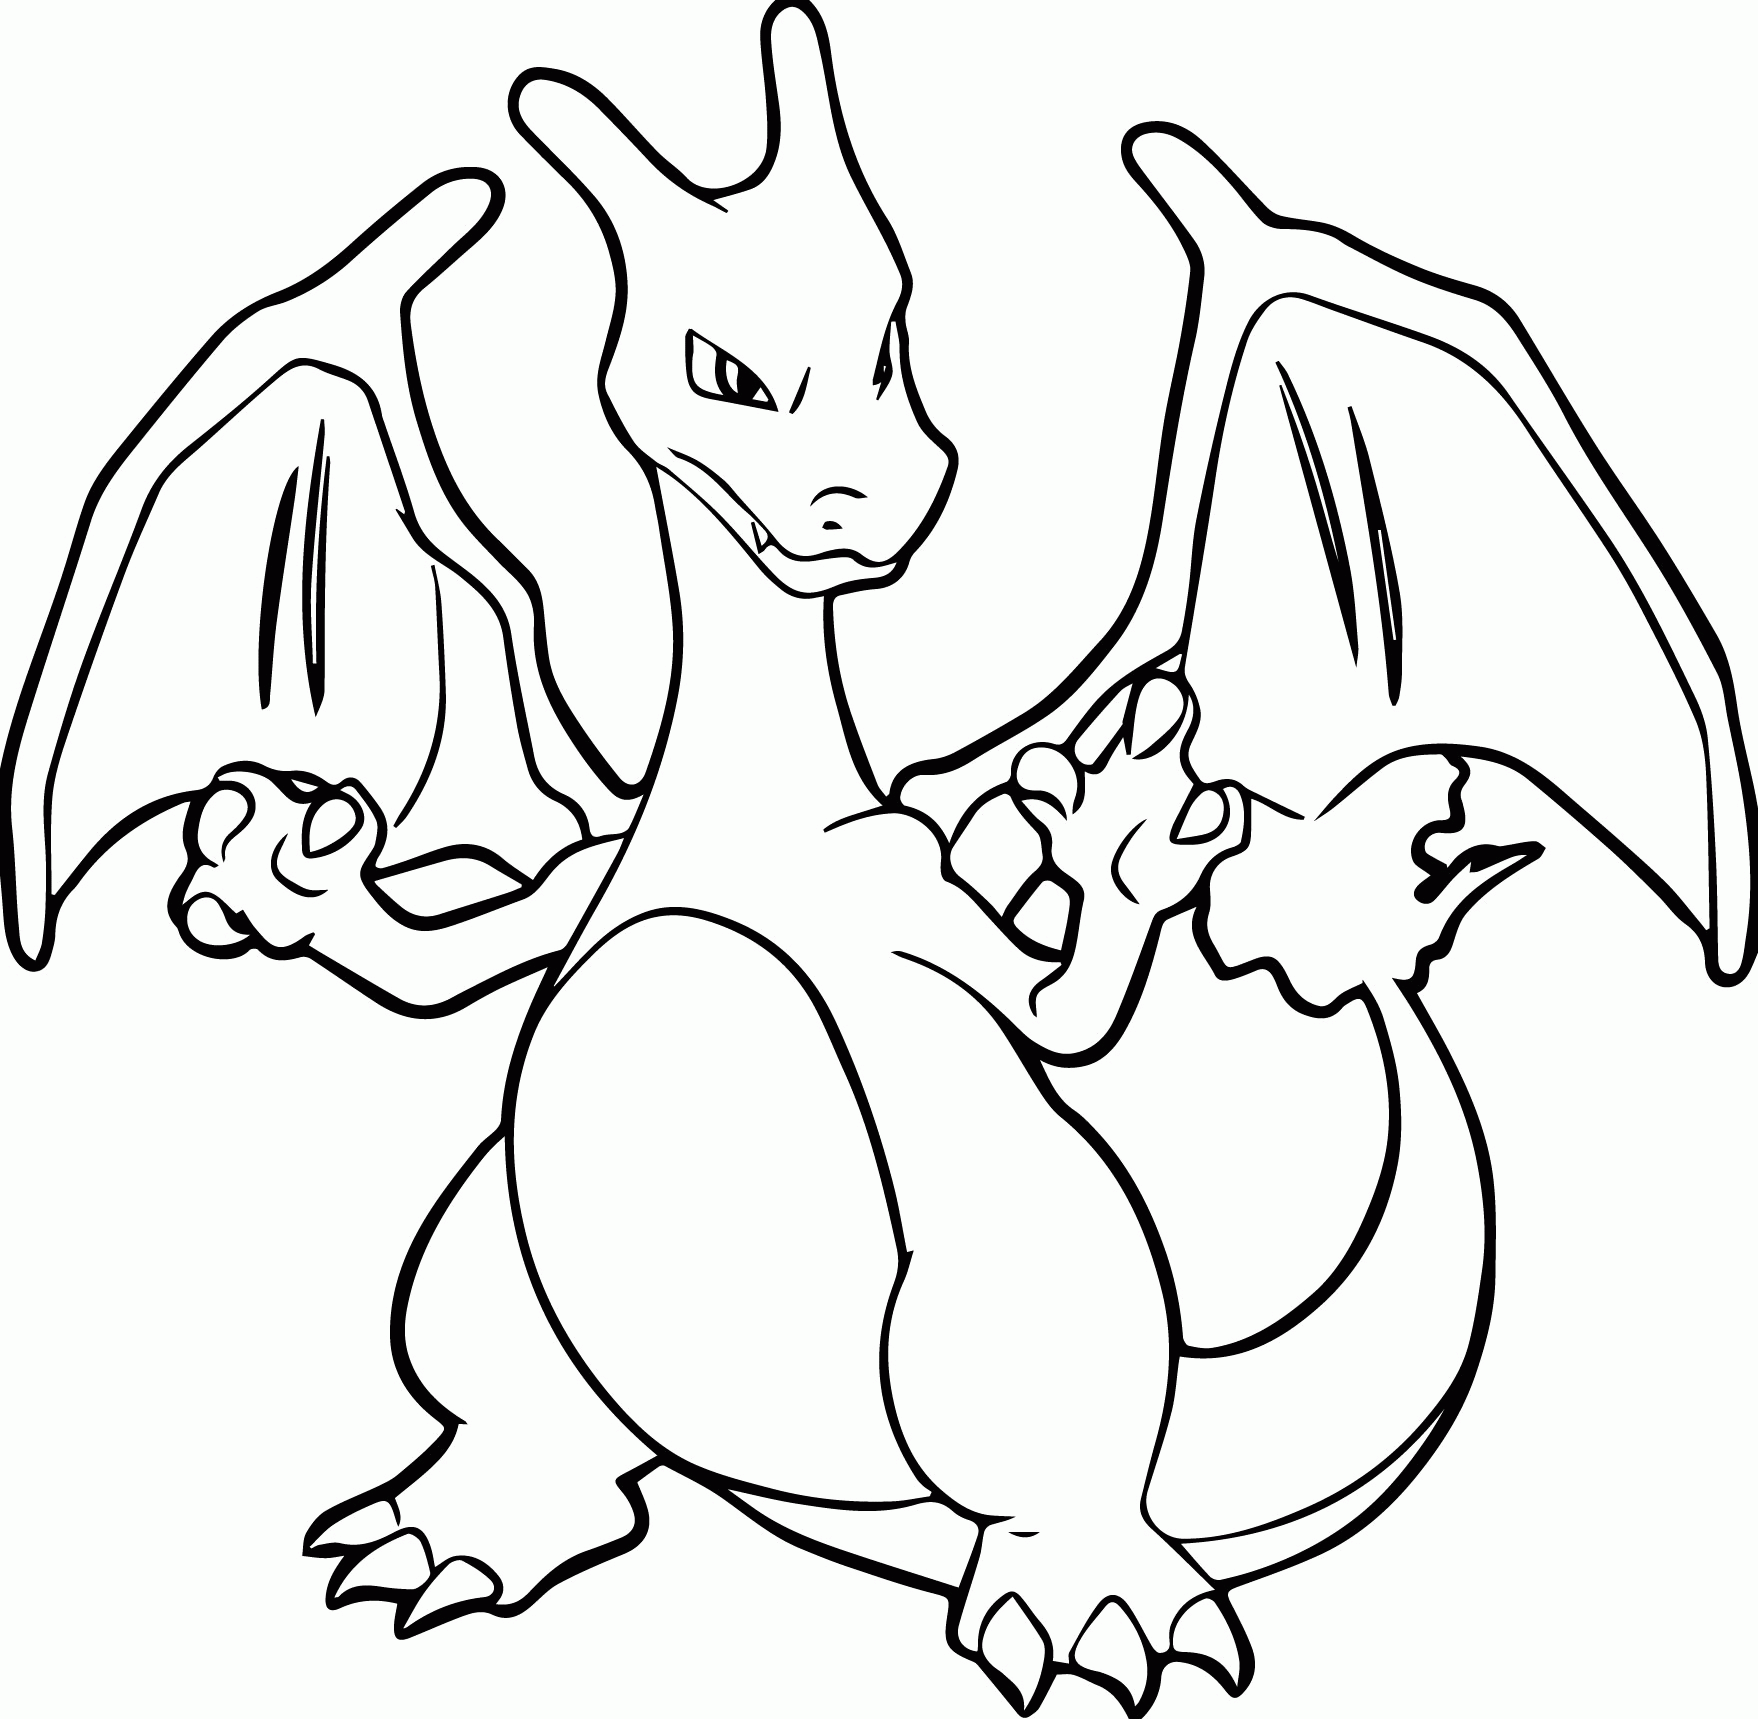 Records Charizard Coloring Pages To Download And Print For Free ...